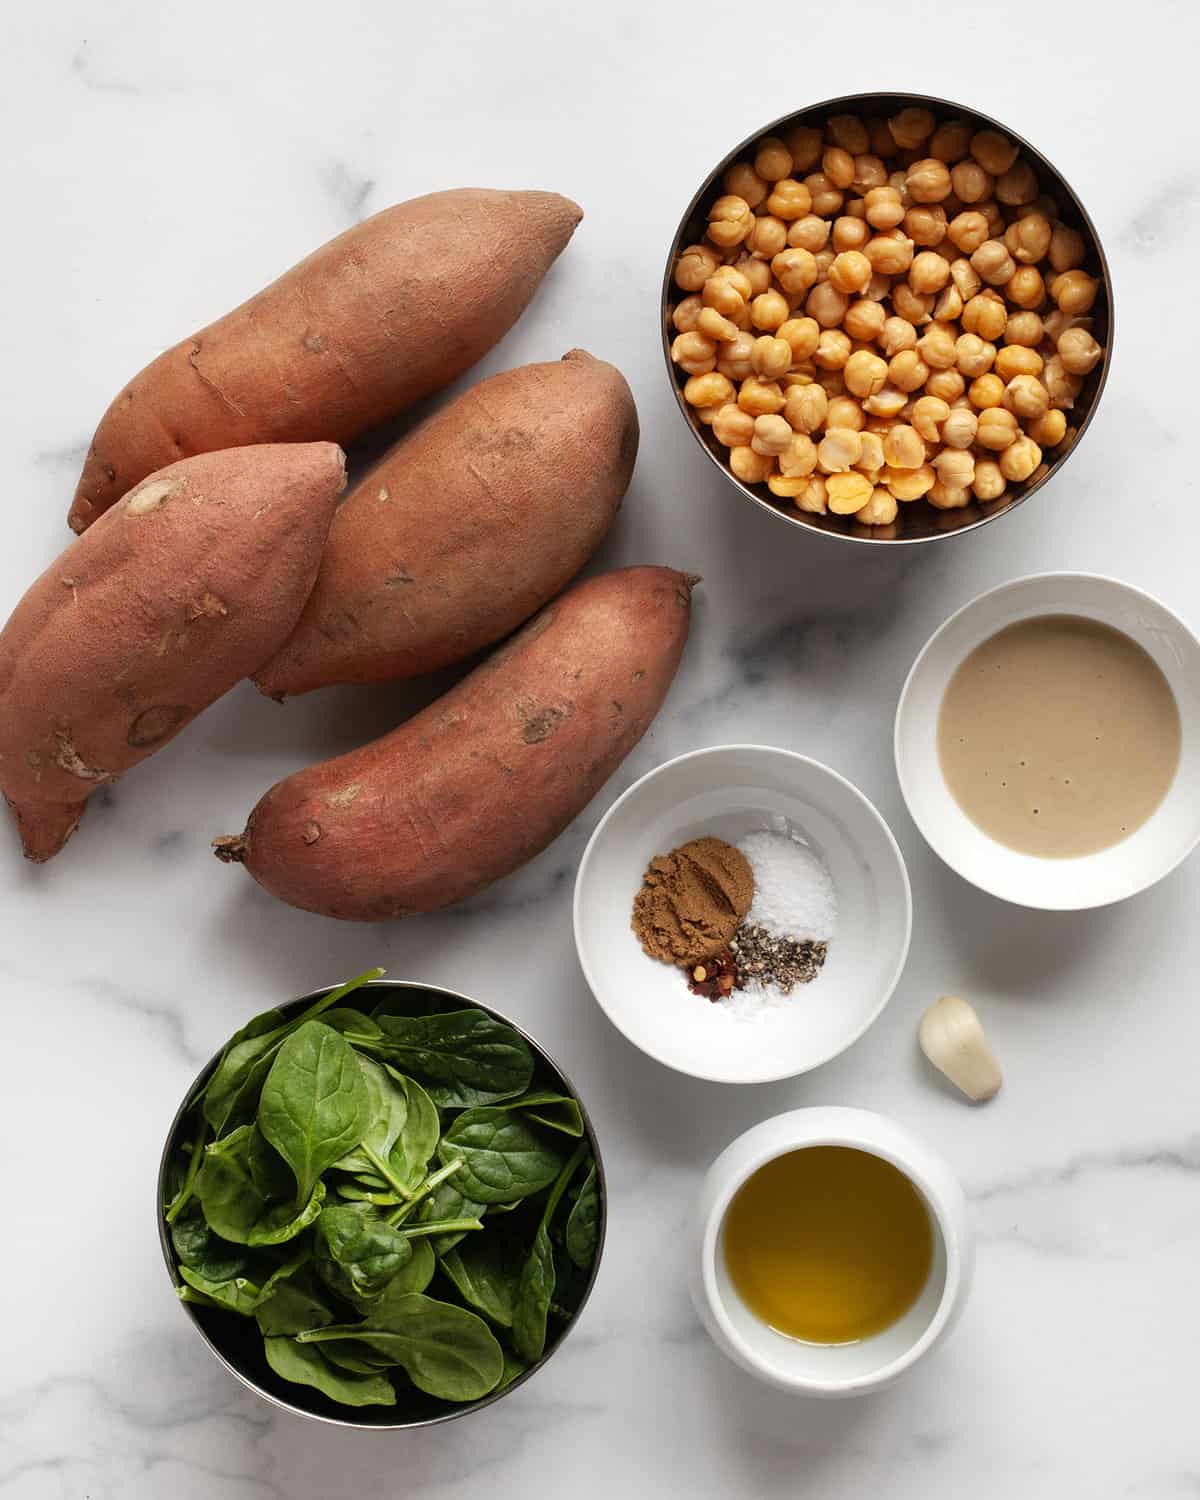 Ingredients including sweet potatoes, chickpeas, spinach, tahini, garlic, oil and spices. 